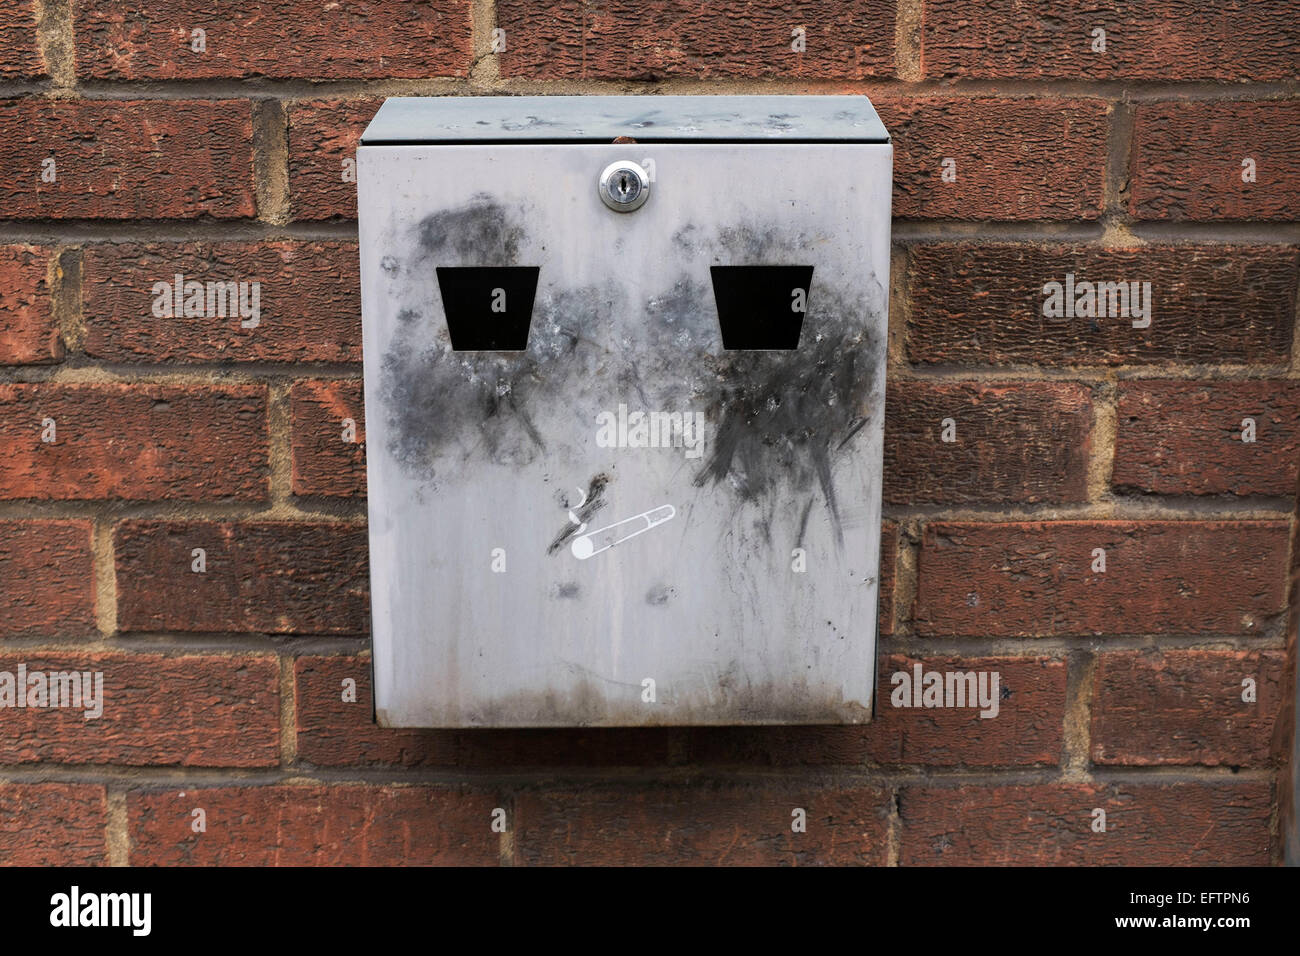 Ash tray which looks like a face on a wall outside. London, UK. Since the smoking ban in public places, these ashtrays have become a common sight as smokers go out to smoke. Stock Photo